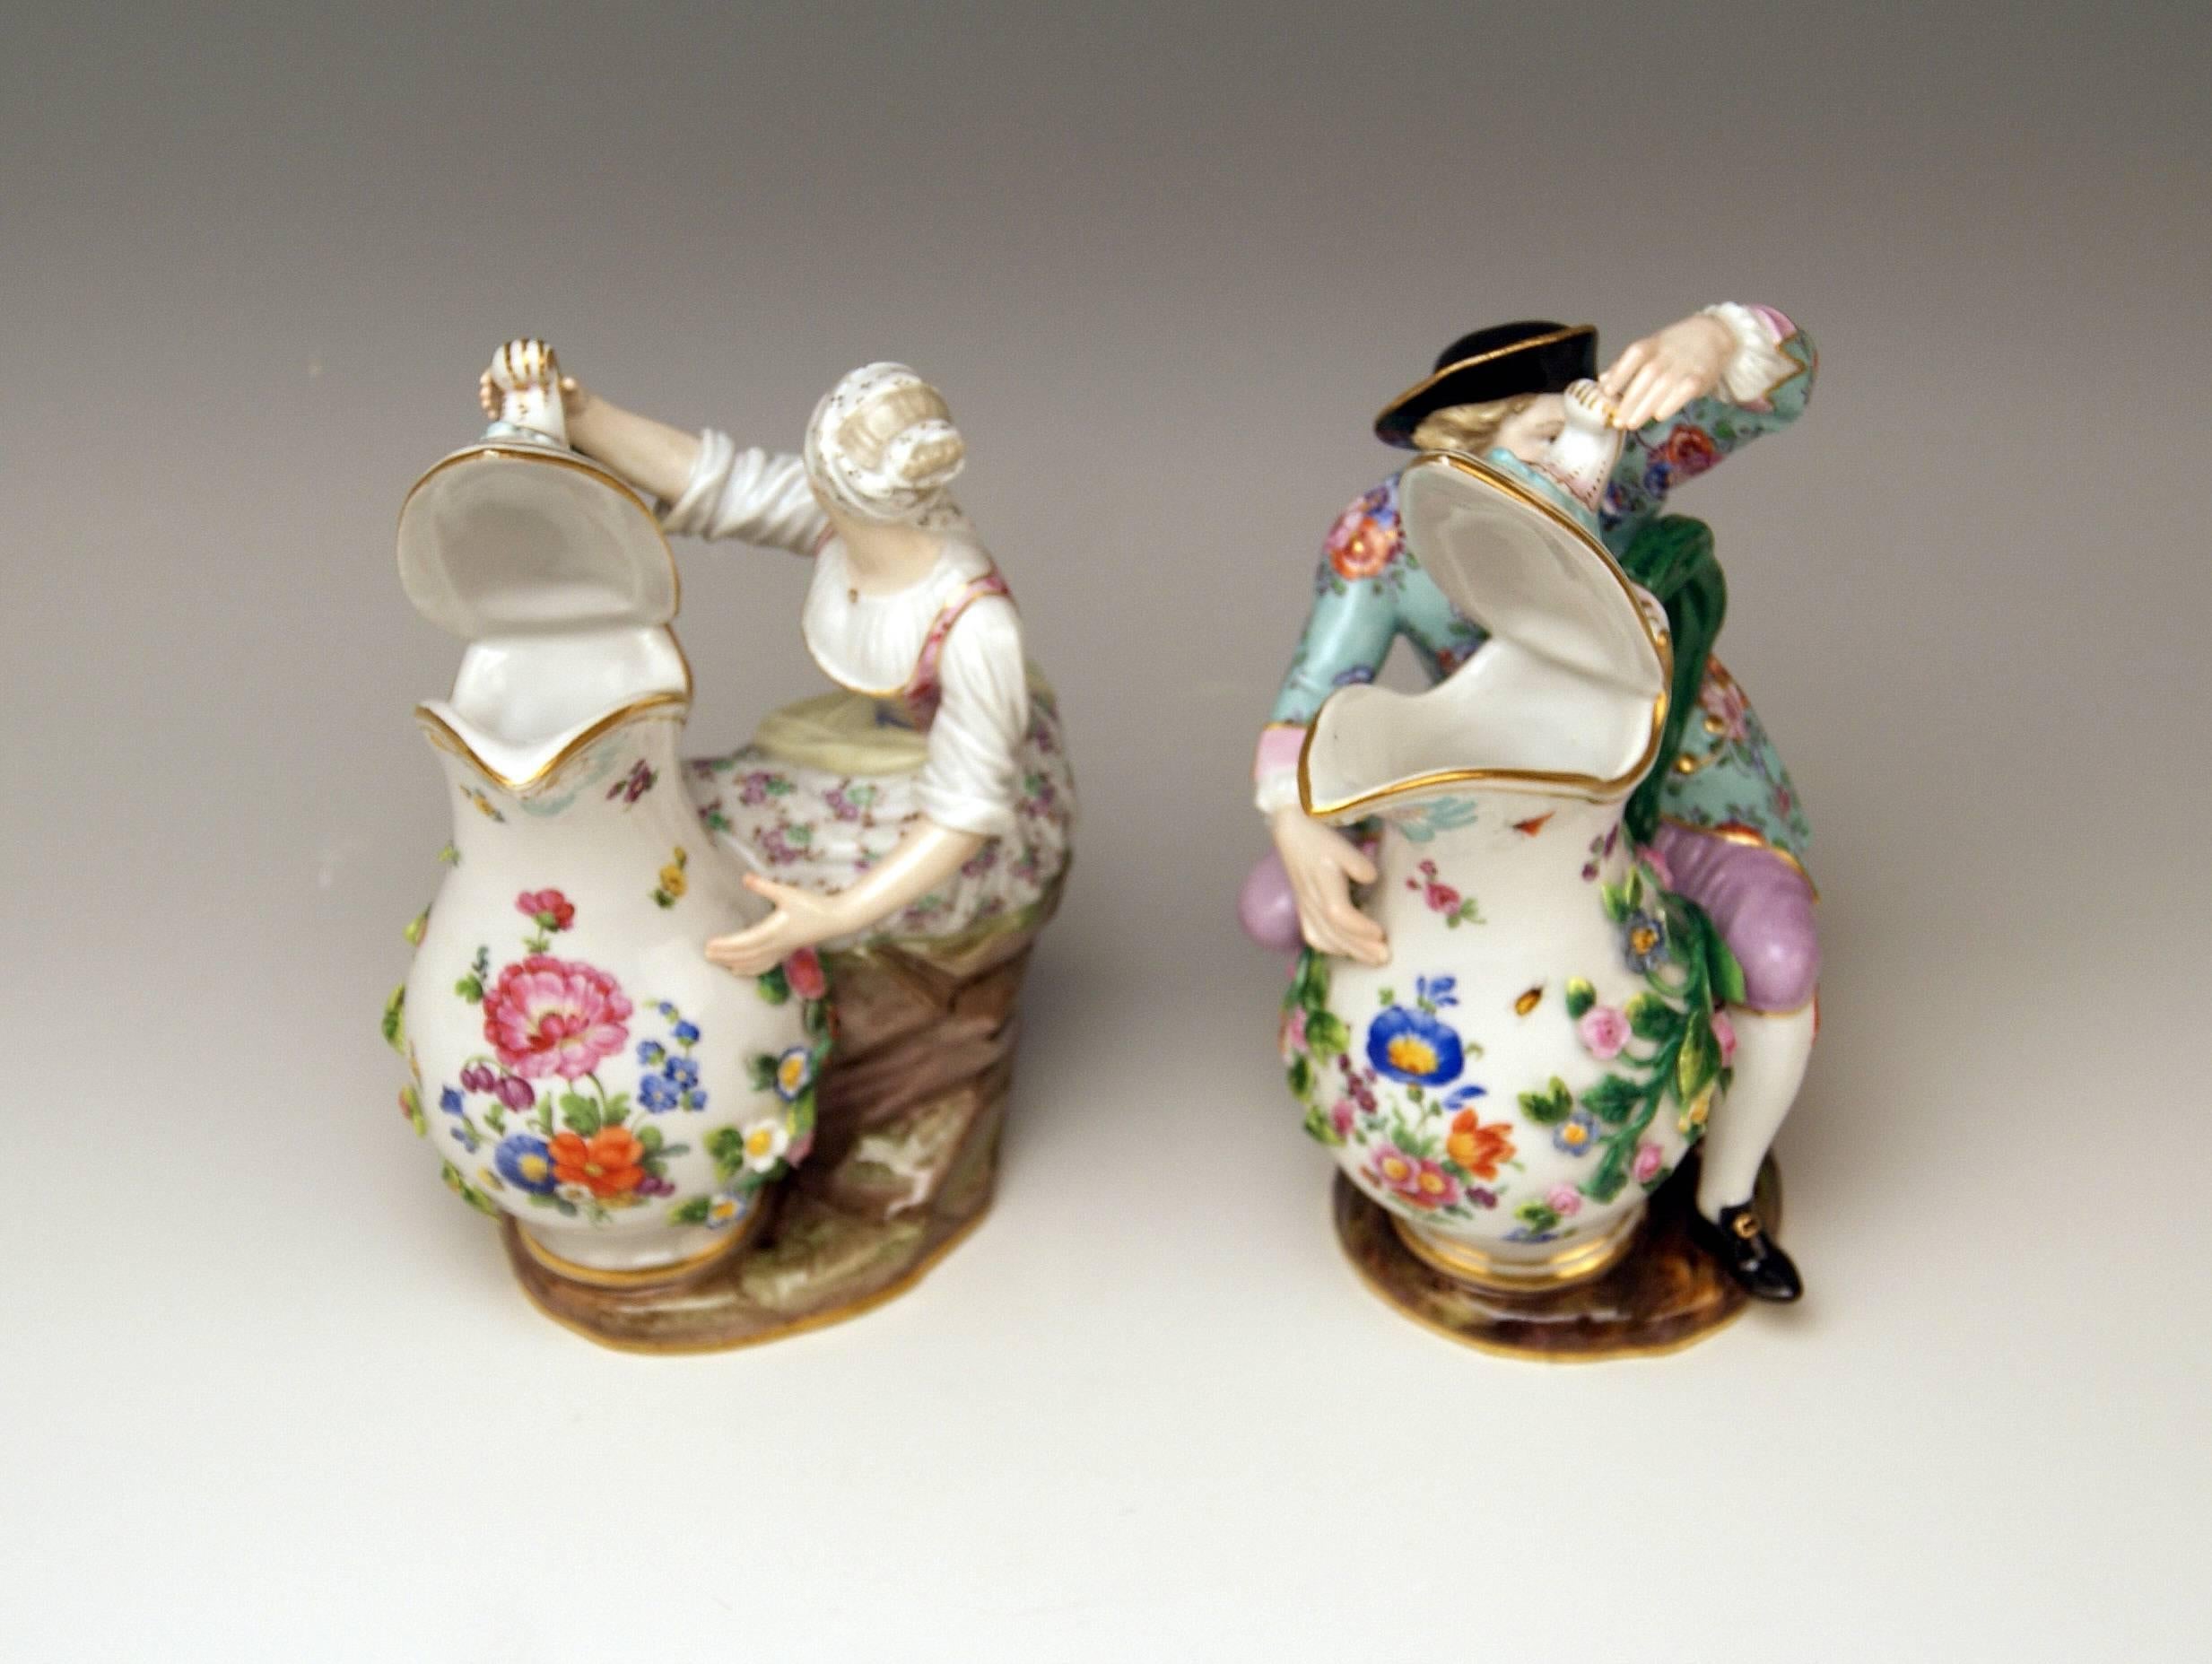 Painted Meissen Pair of Figurines with Jug Pitcher by Eberlein Models 1234 907 made 1850 For Sale